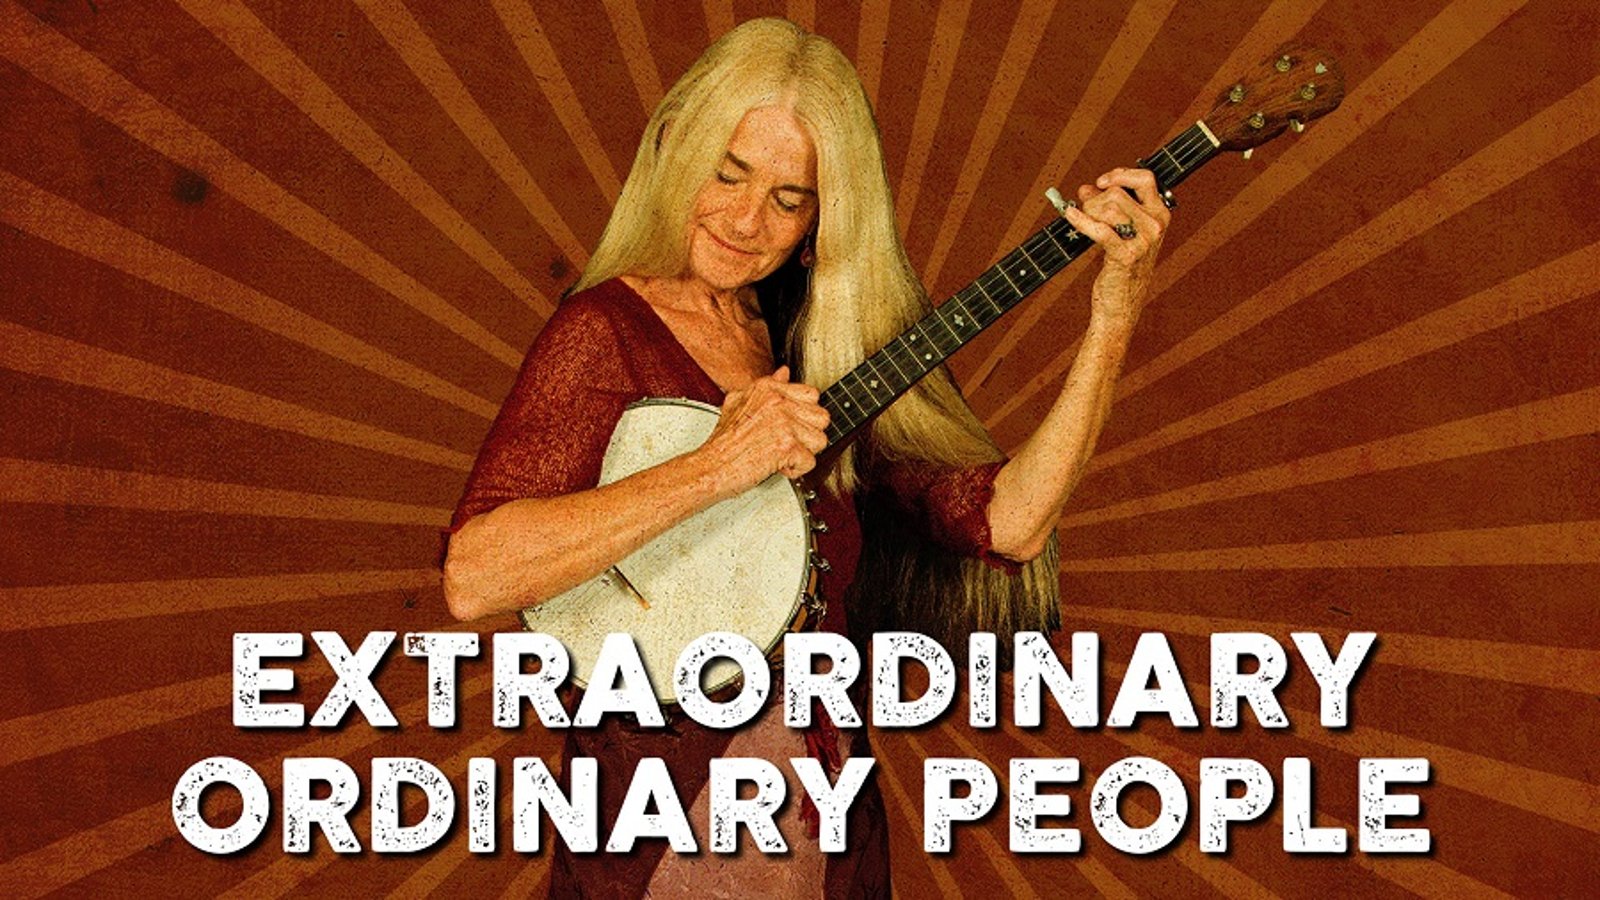 Extraordinary Ordinary People - Folk and Traditional Arts in America